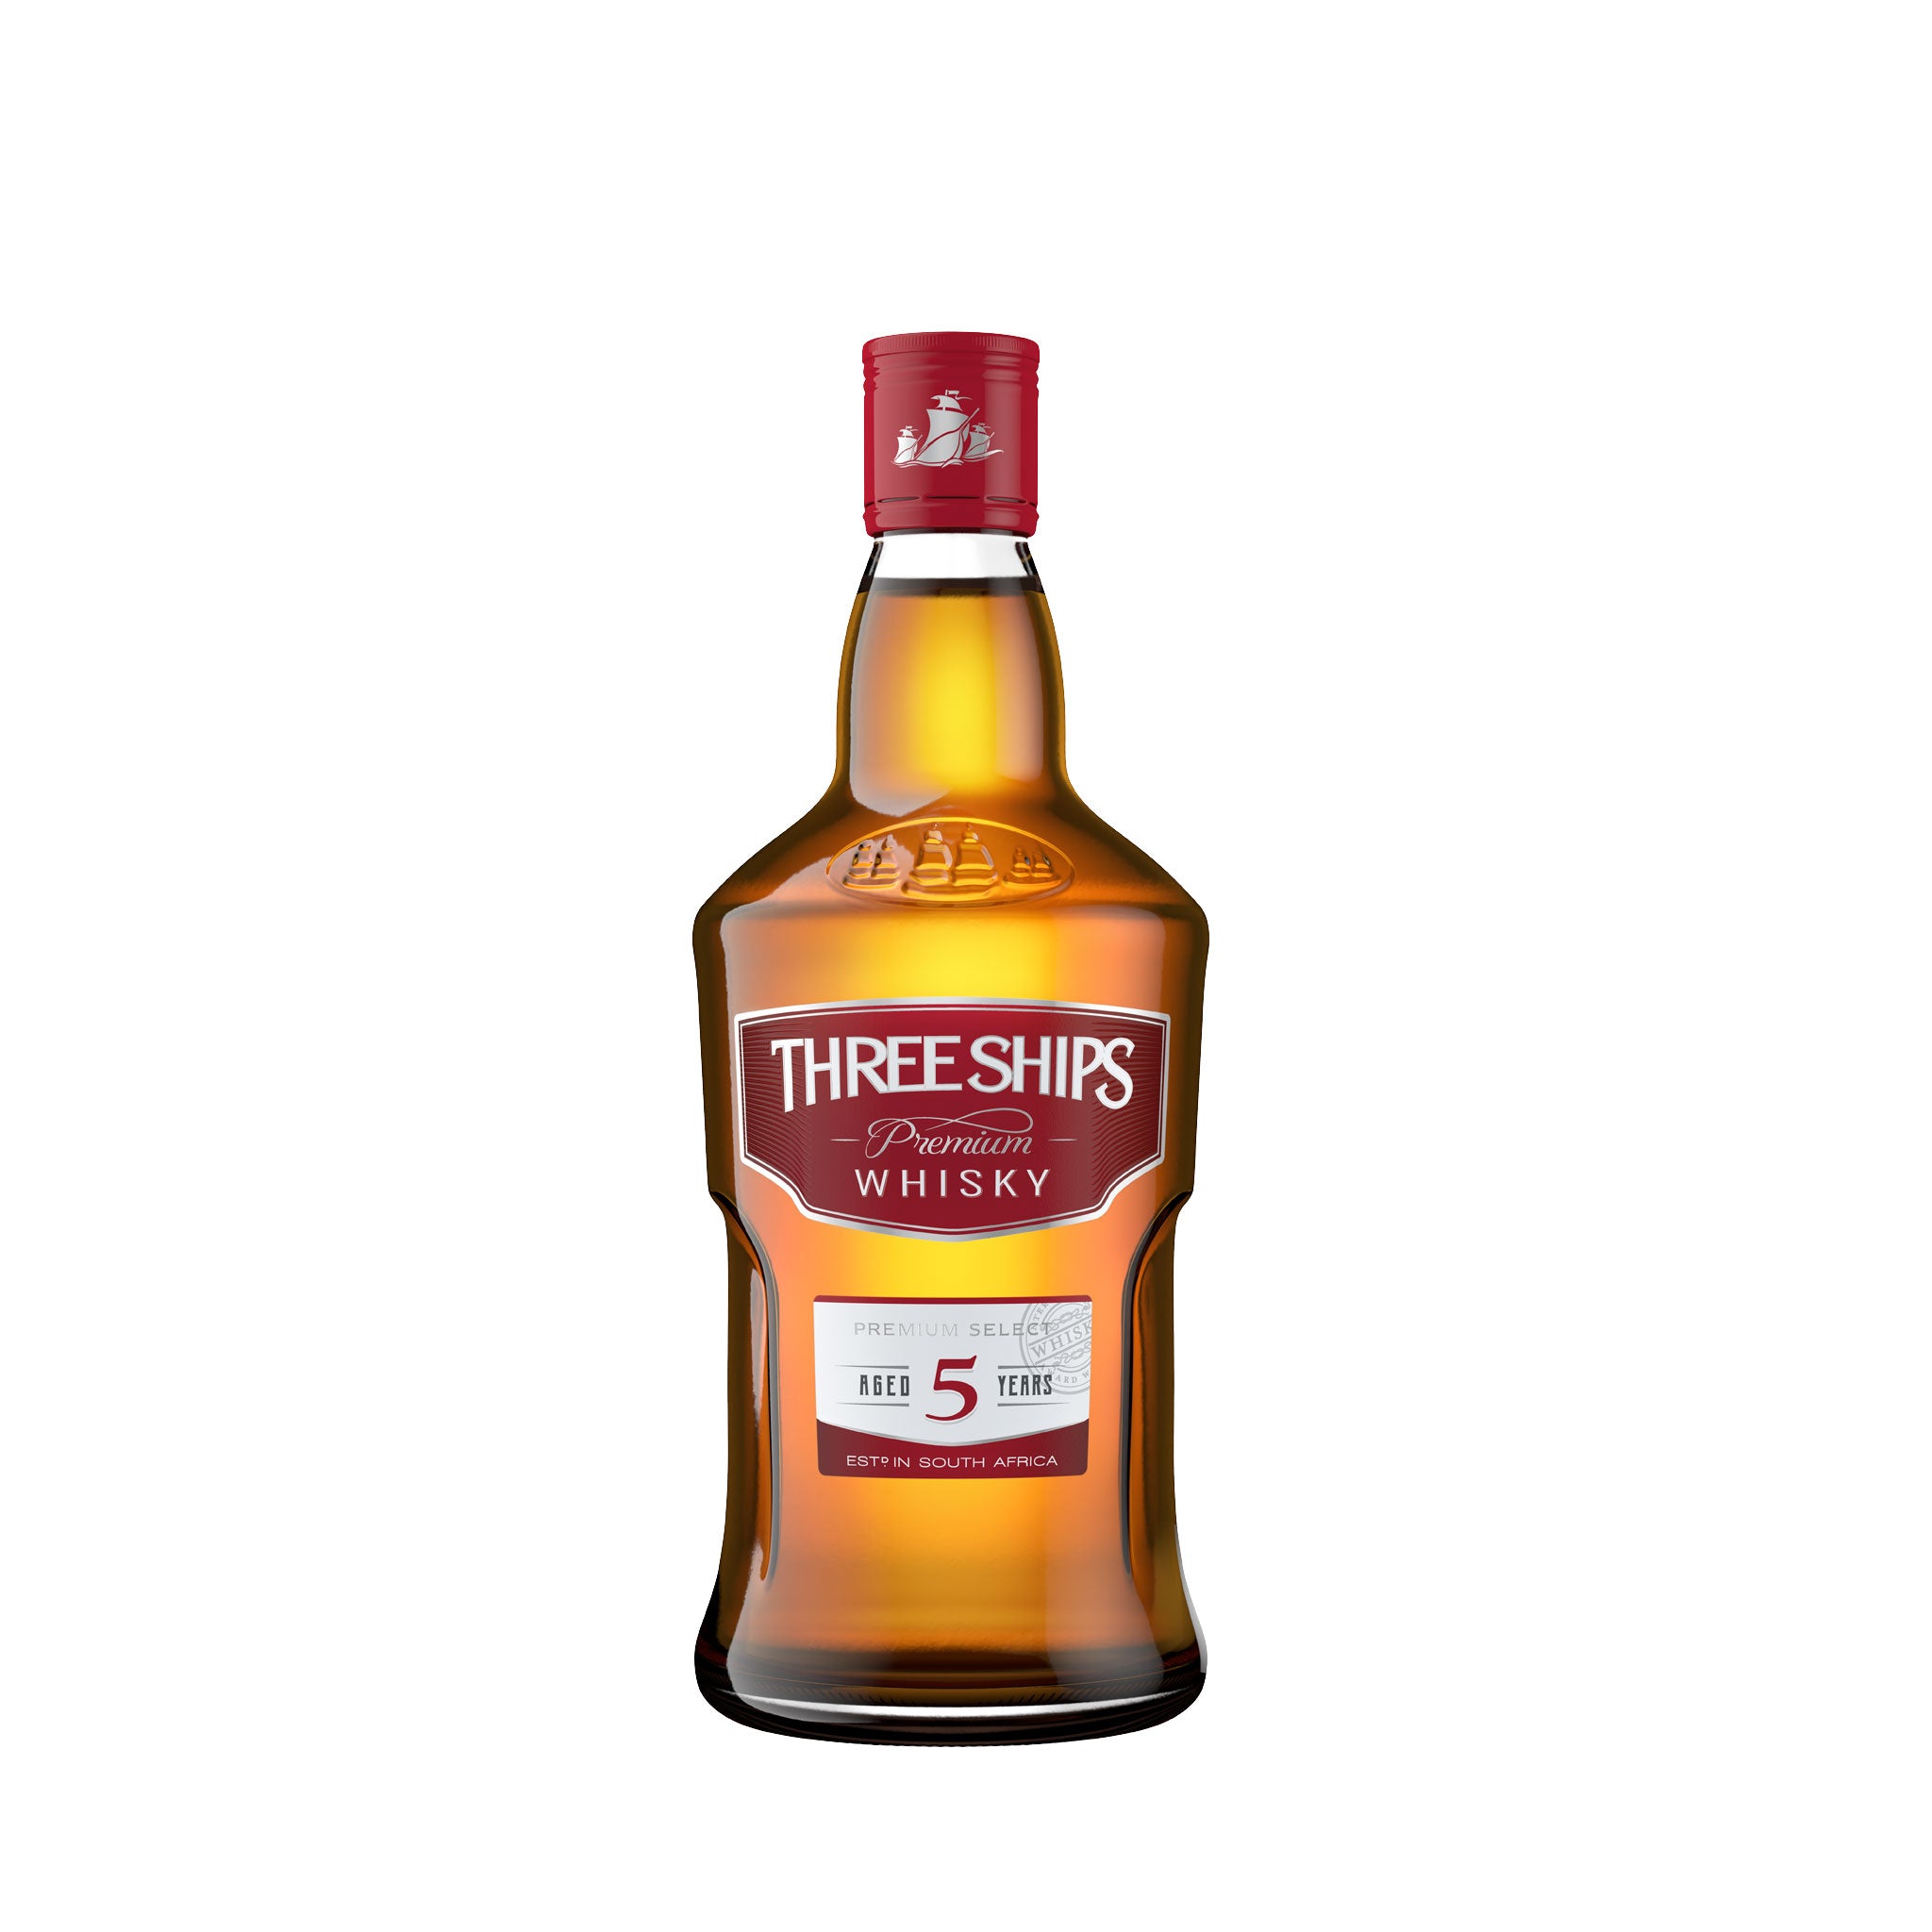 Three Ships Whisky Premium Select 5 year old